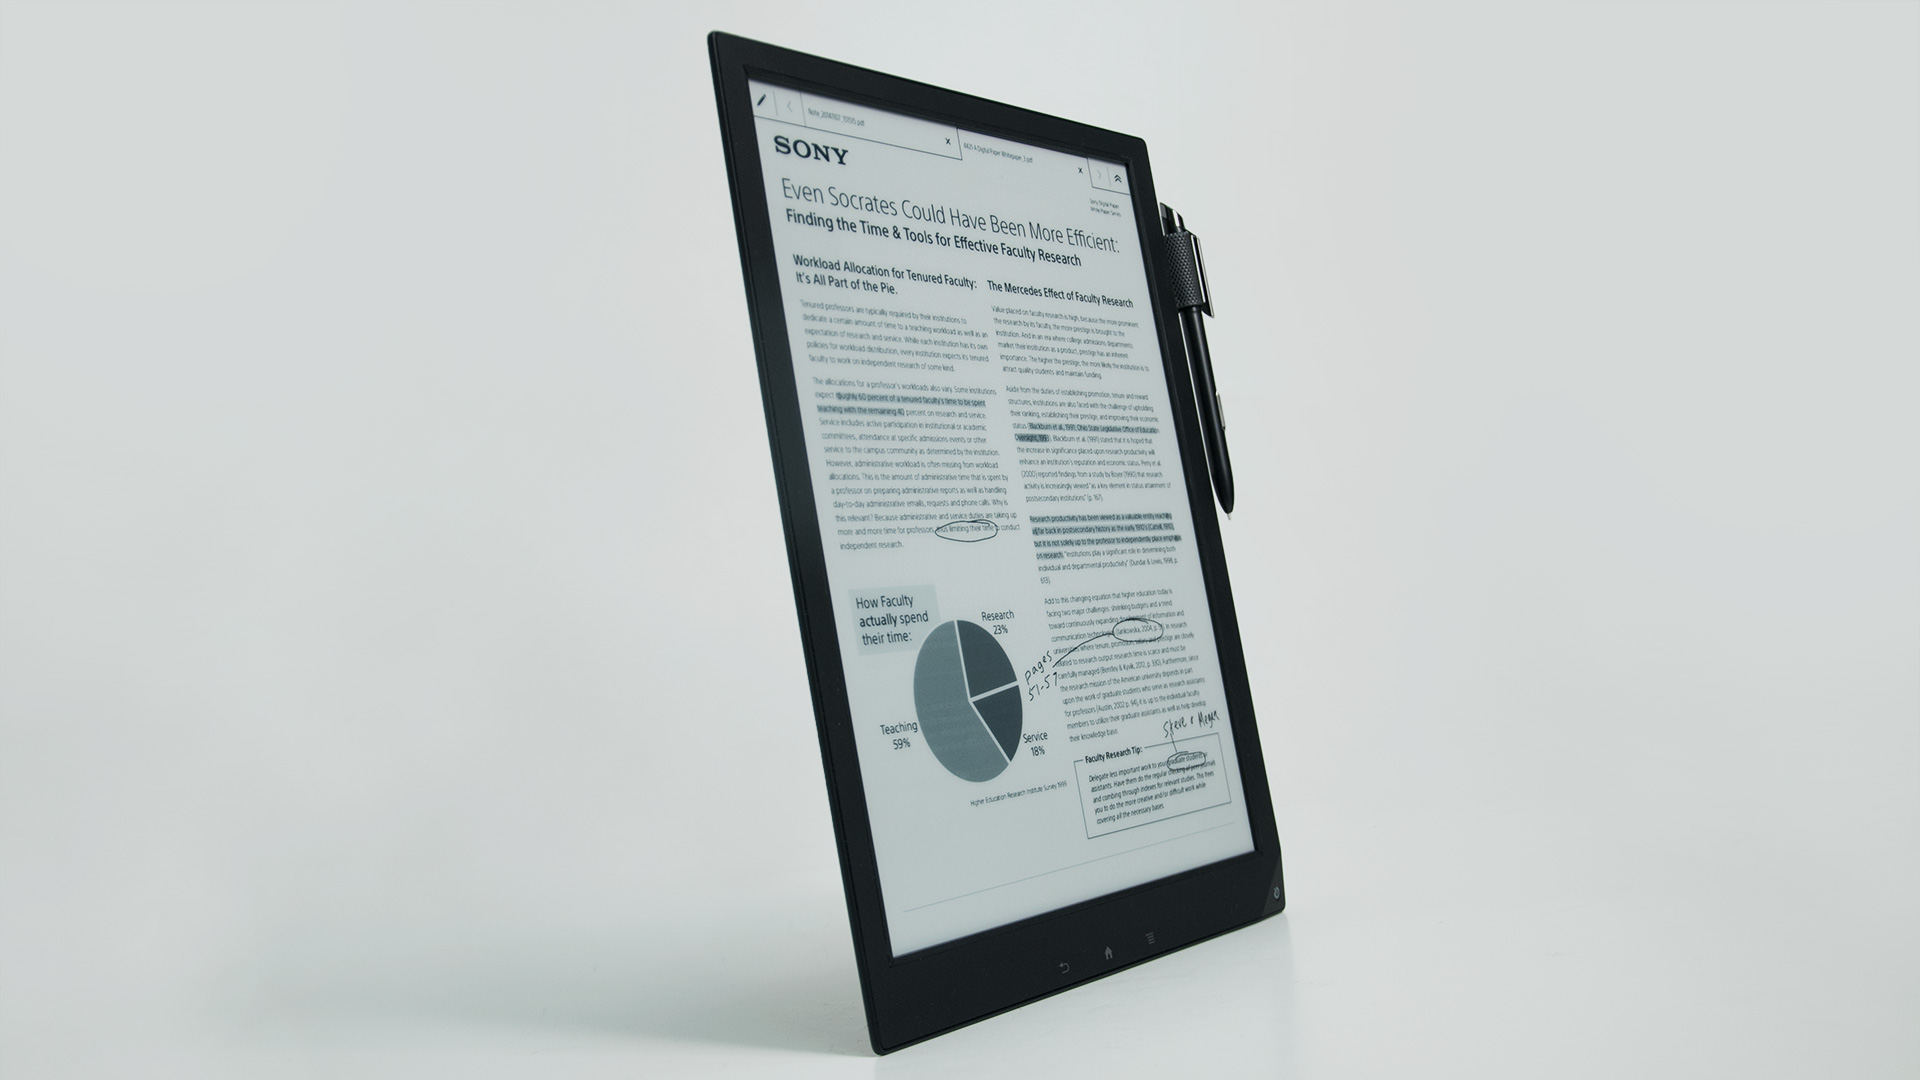 Sony unveils new Digital Paper office-based tablet